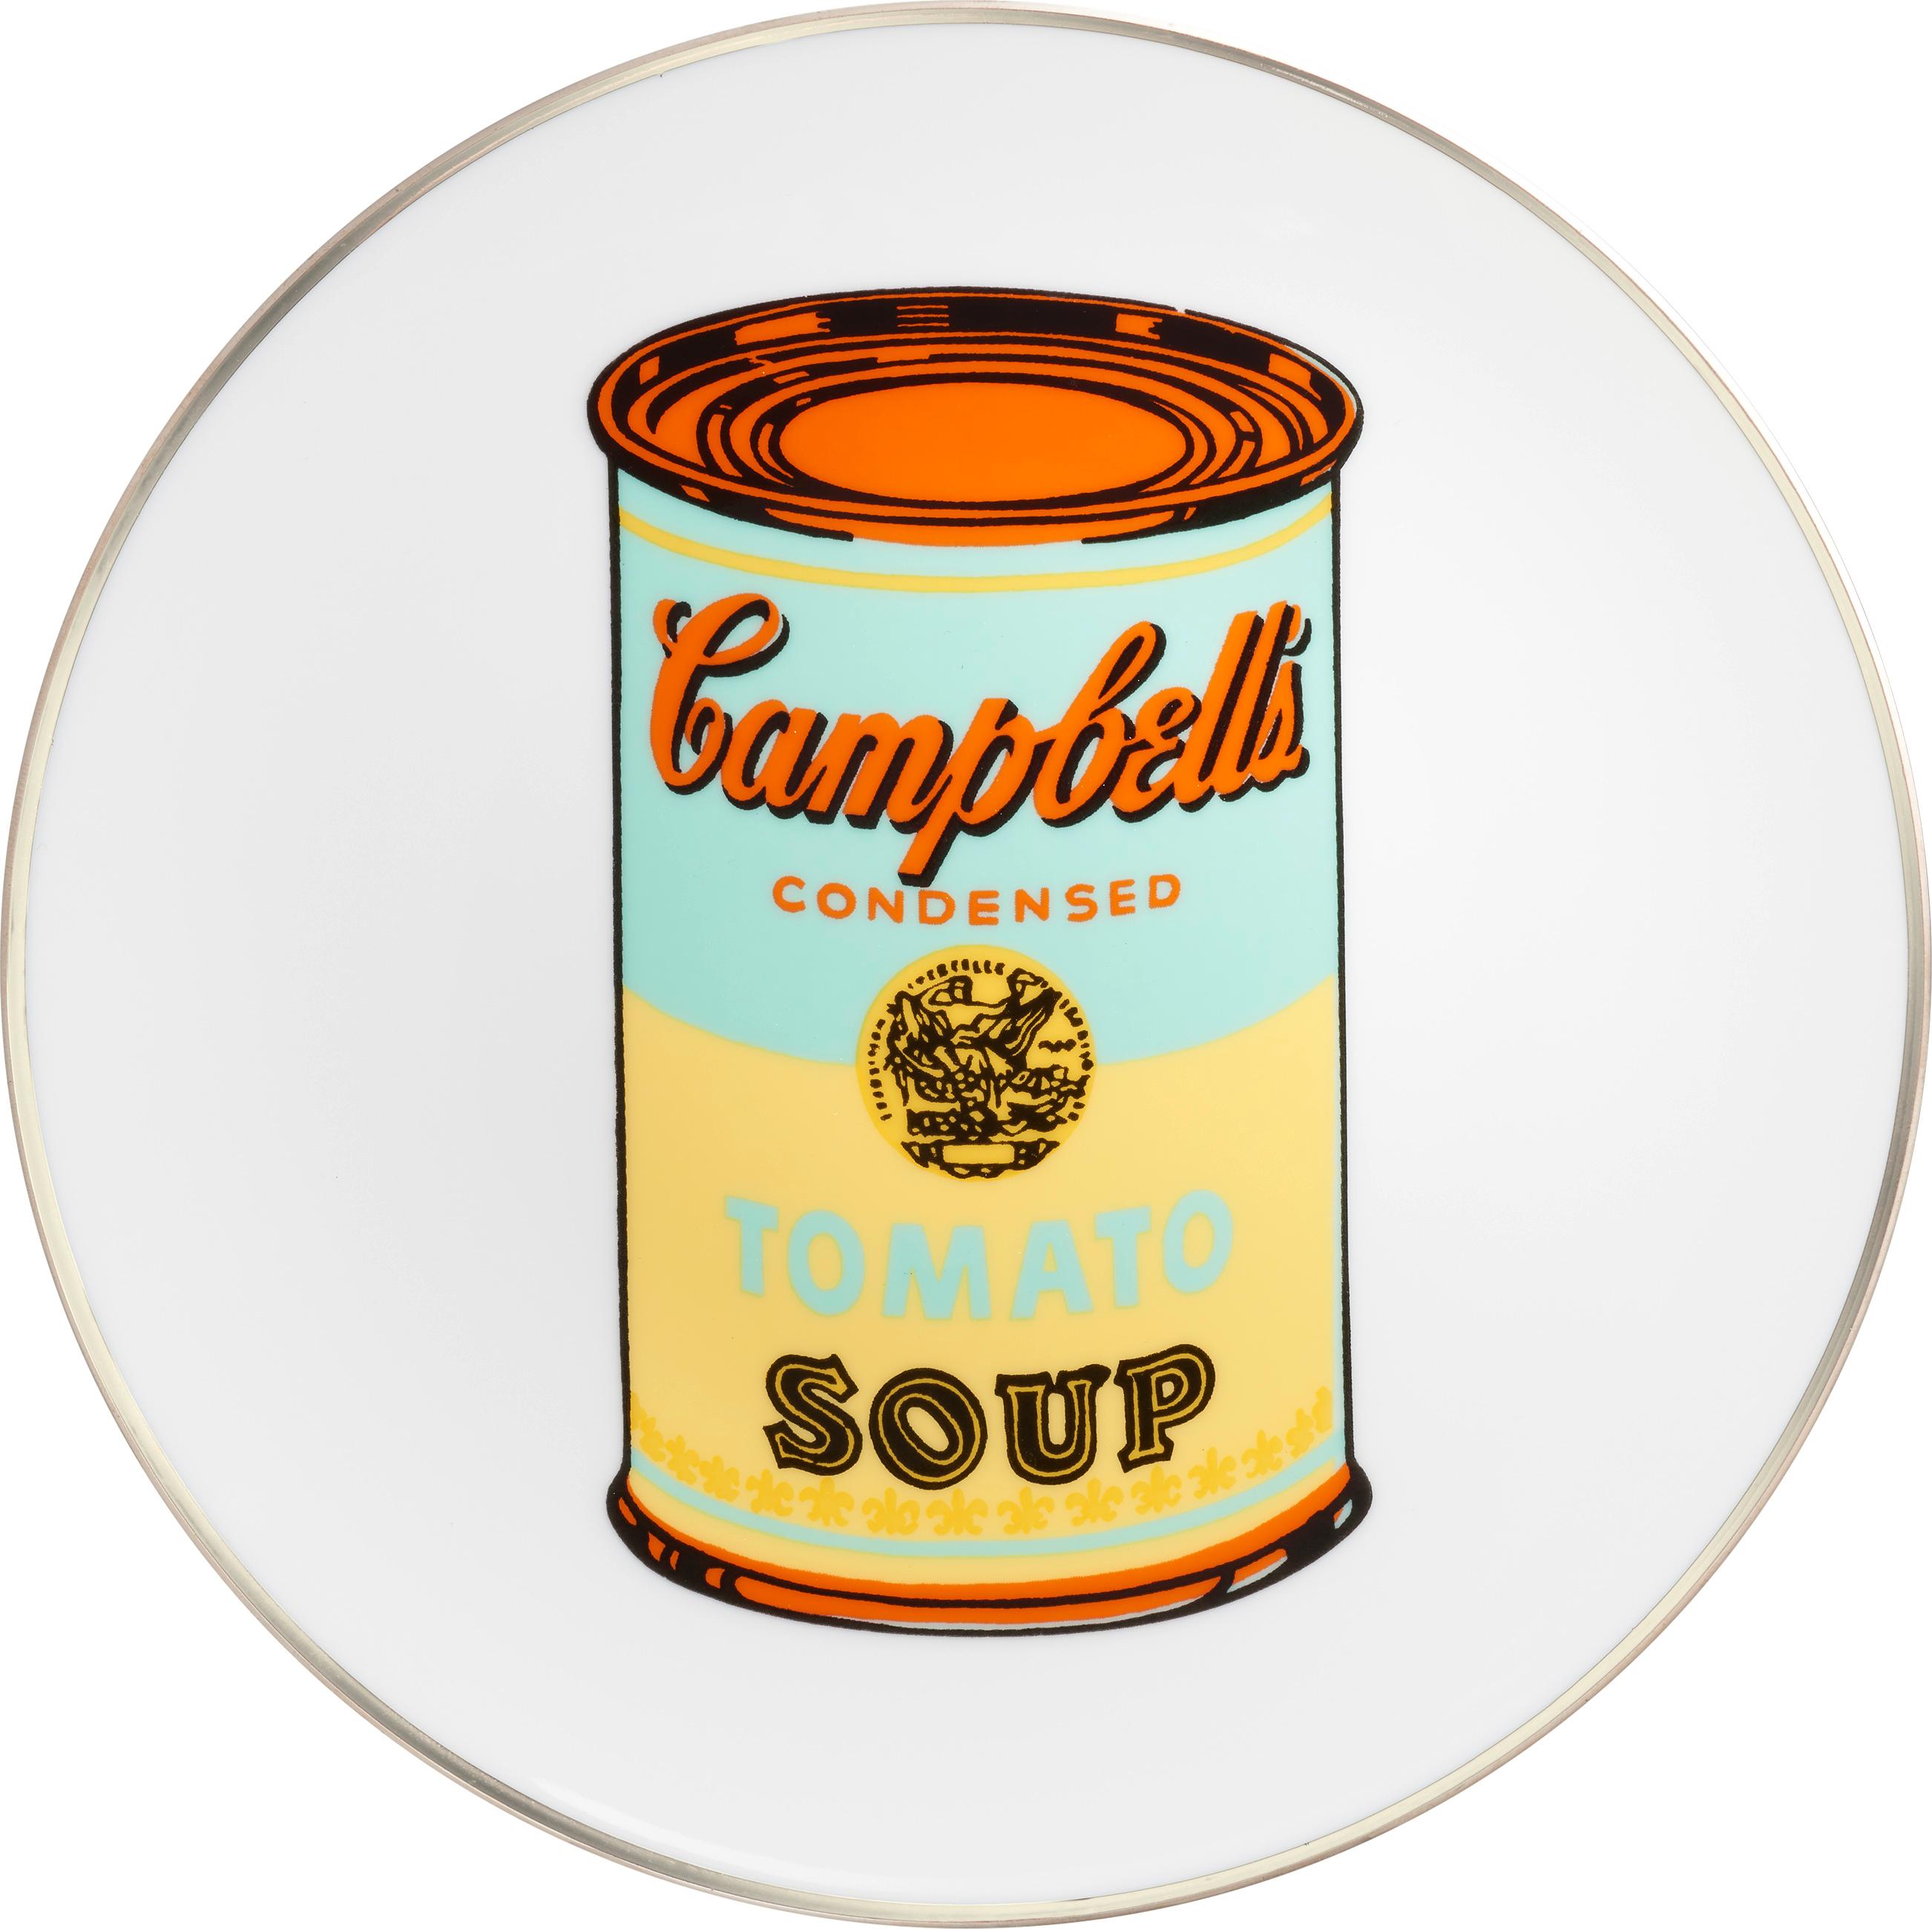 Contemporary Campbell's Soup Dinner Plates, after Andy Warhol